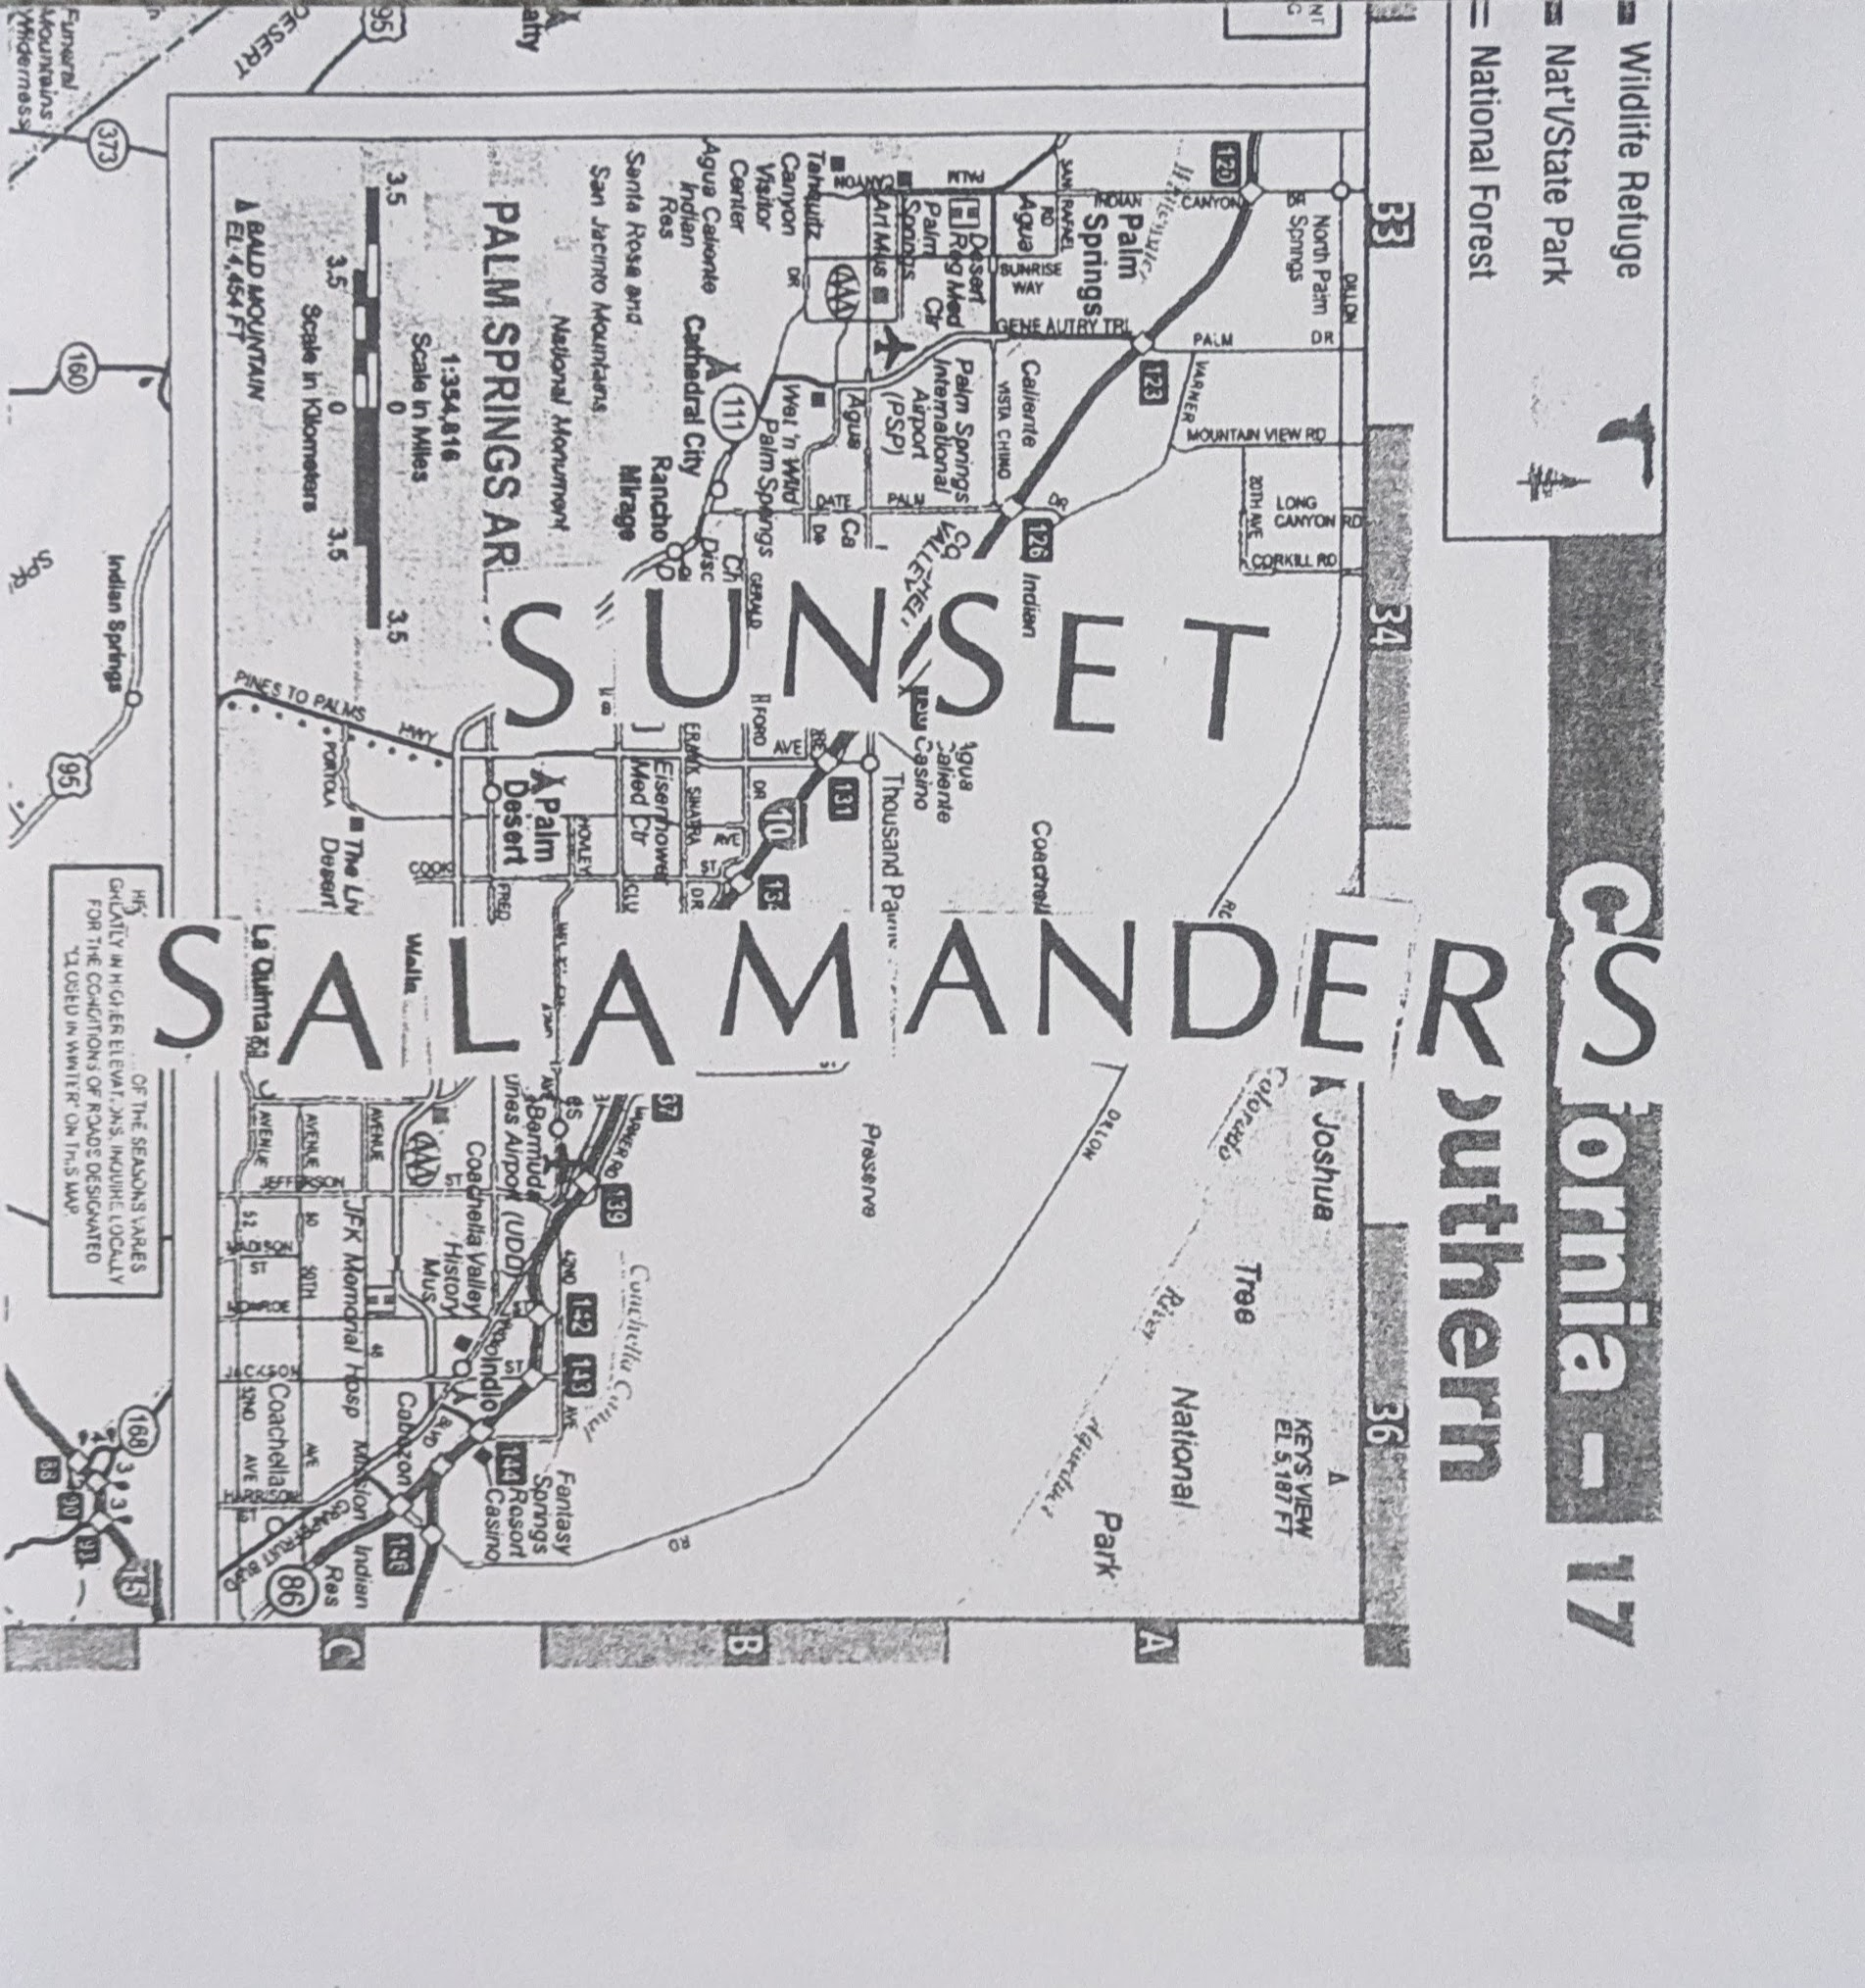 The cover of the zine “Sunset Salamanders.” It is a collage with the title over a map of Los Angeles.